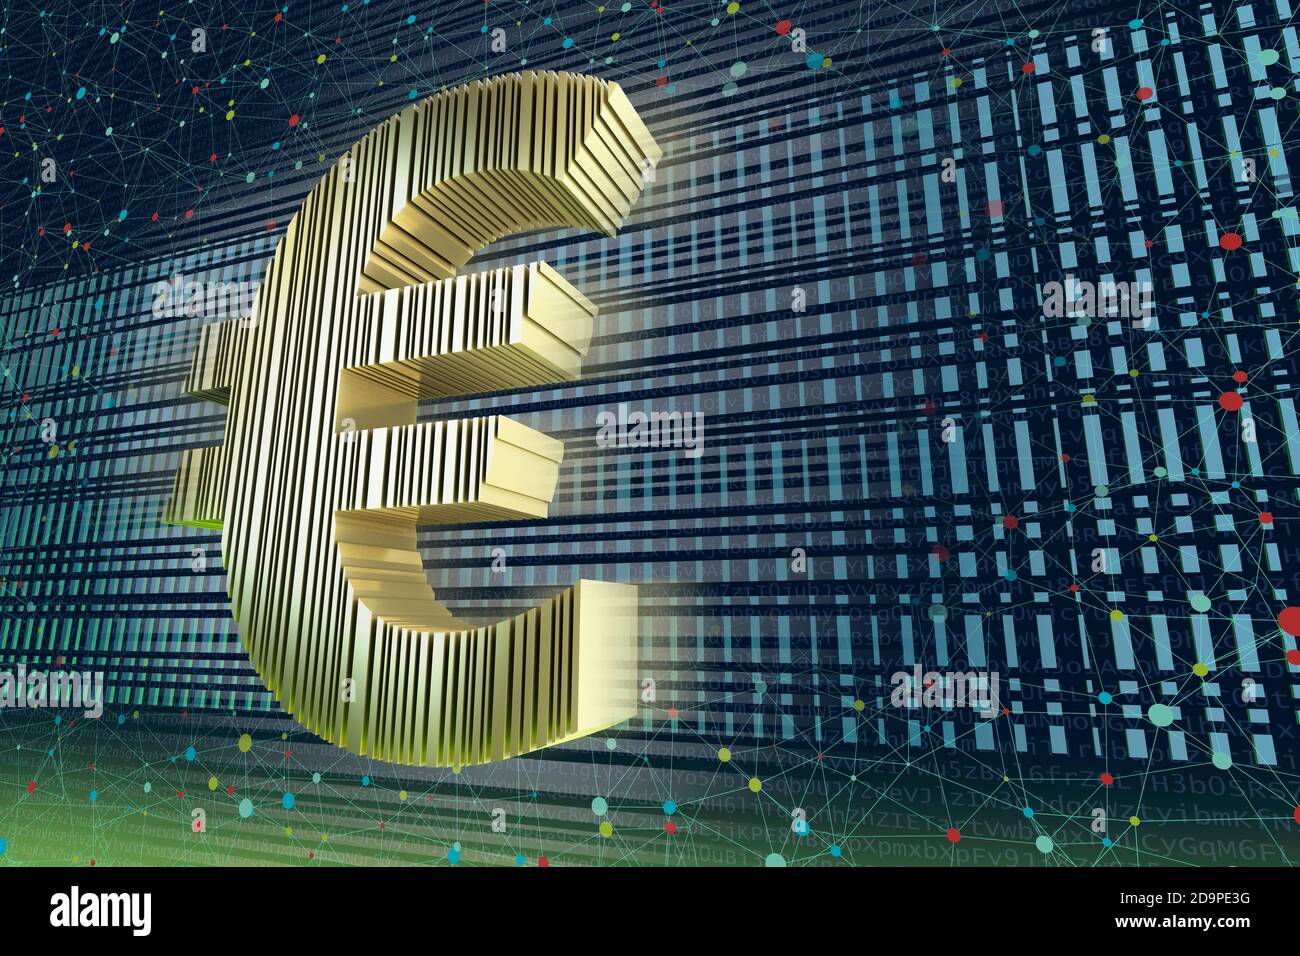 The gold-colored euro symbol symbolizes the digital euro against a dark blue background with barcodes and a network Stock Photo